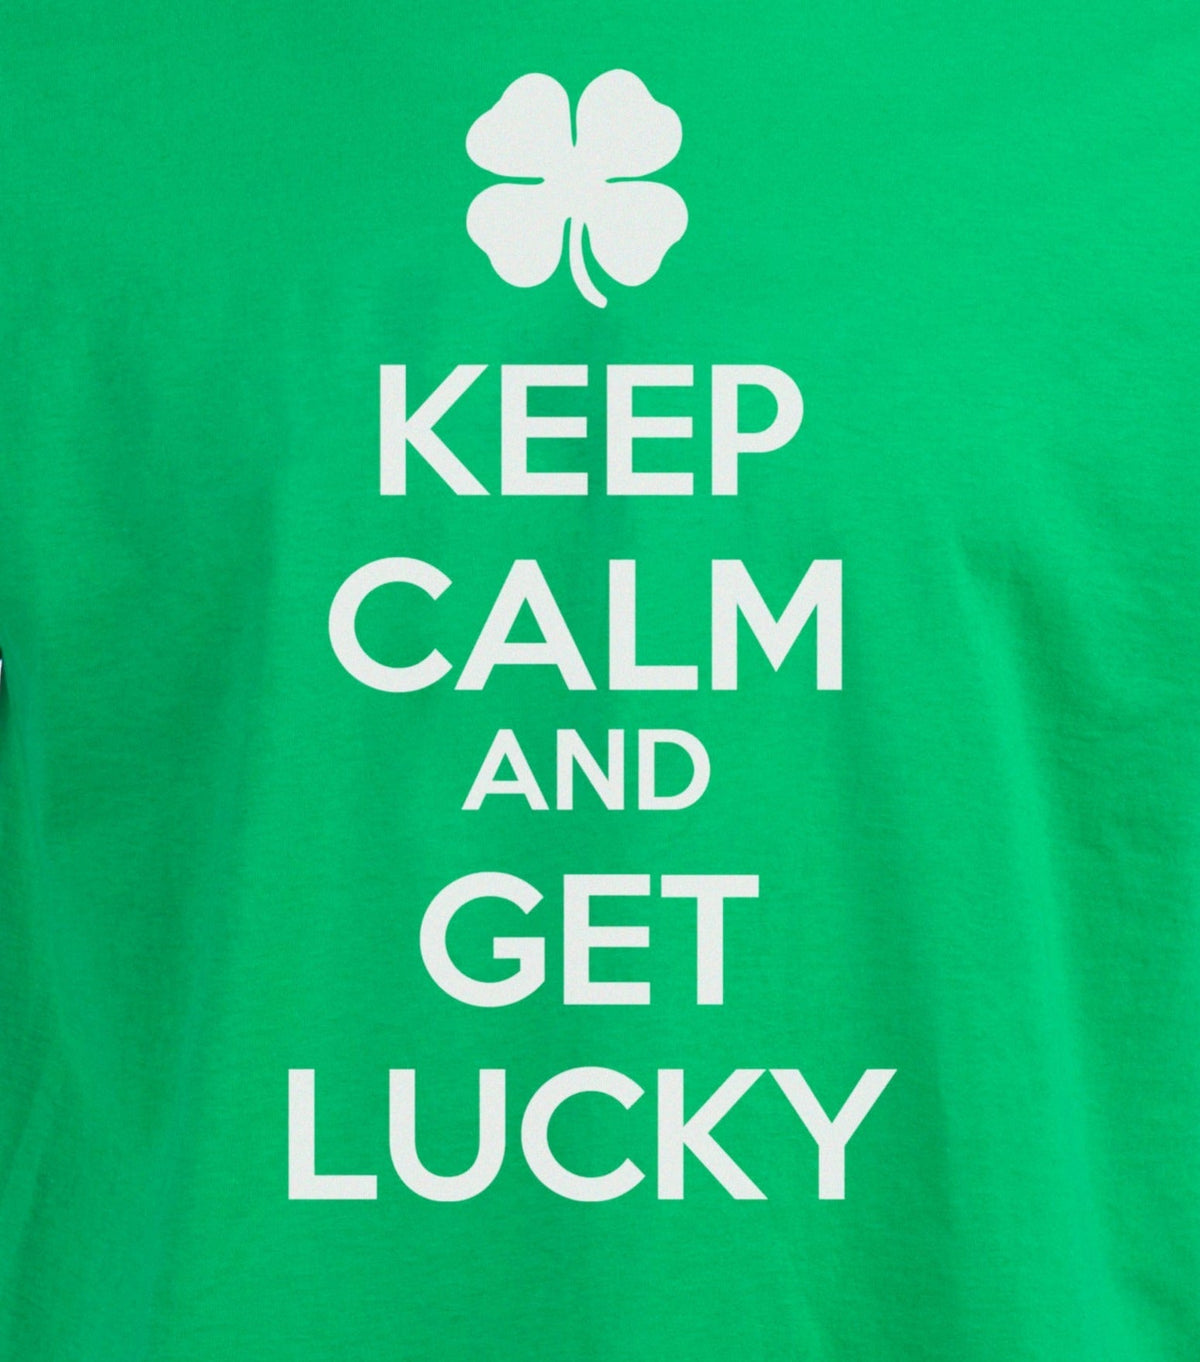 Keep Calm And Get Lucky - St. Patrick's Day Good Luck Funny T-shirt - Kid's/Youth